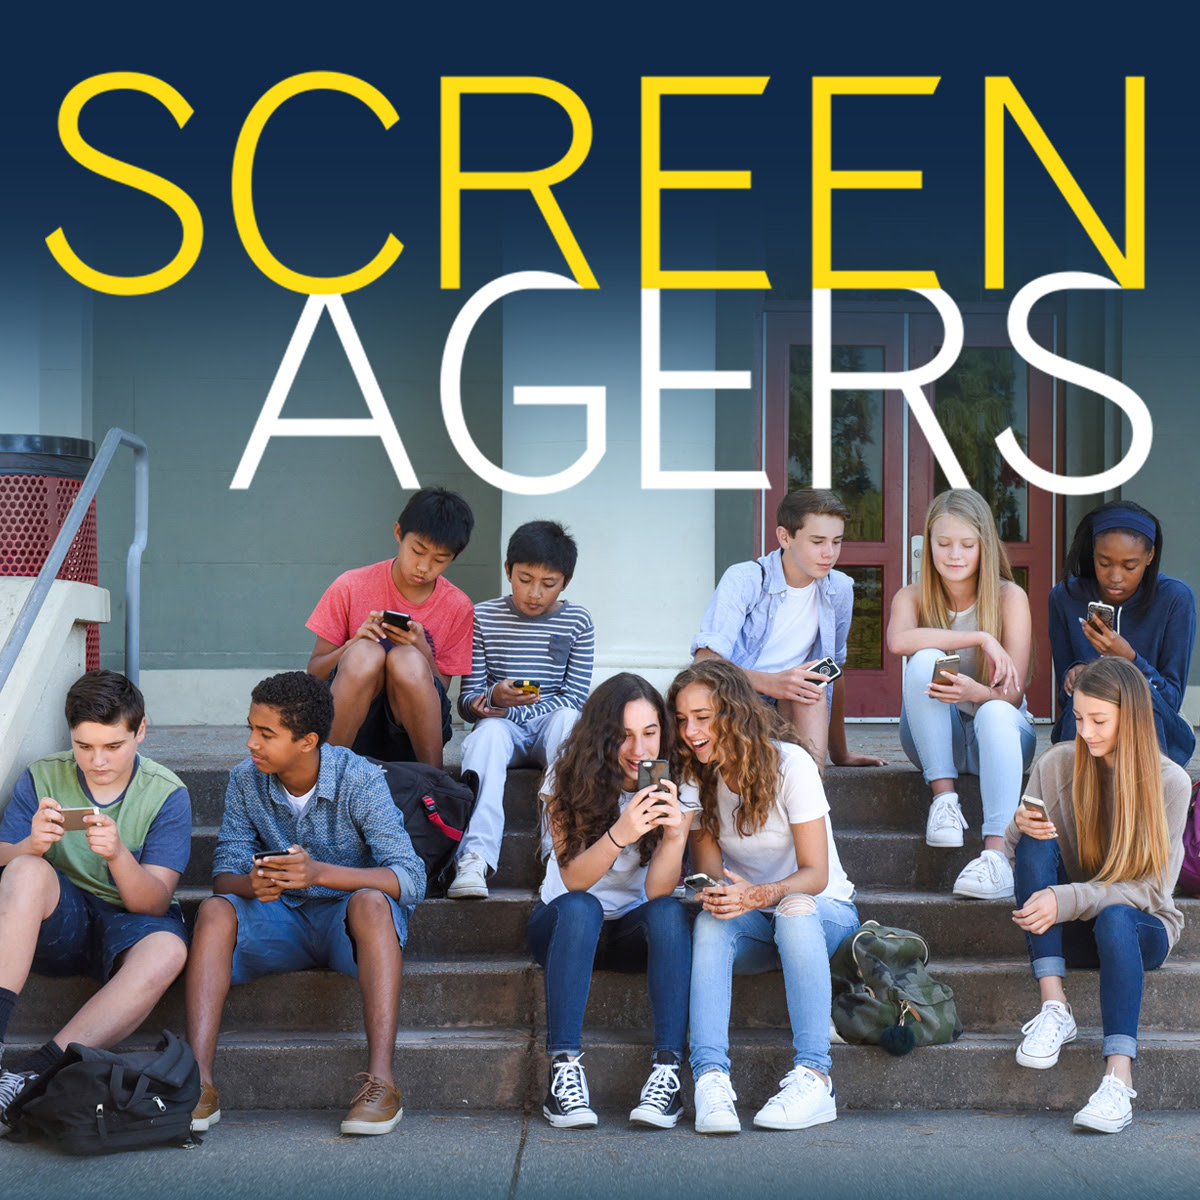 Screenagers Film Presented By Portsmouth High School